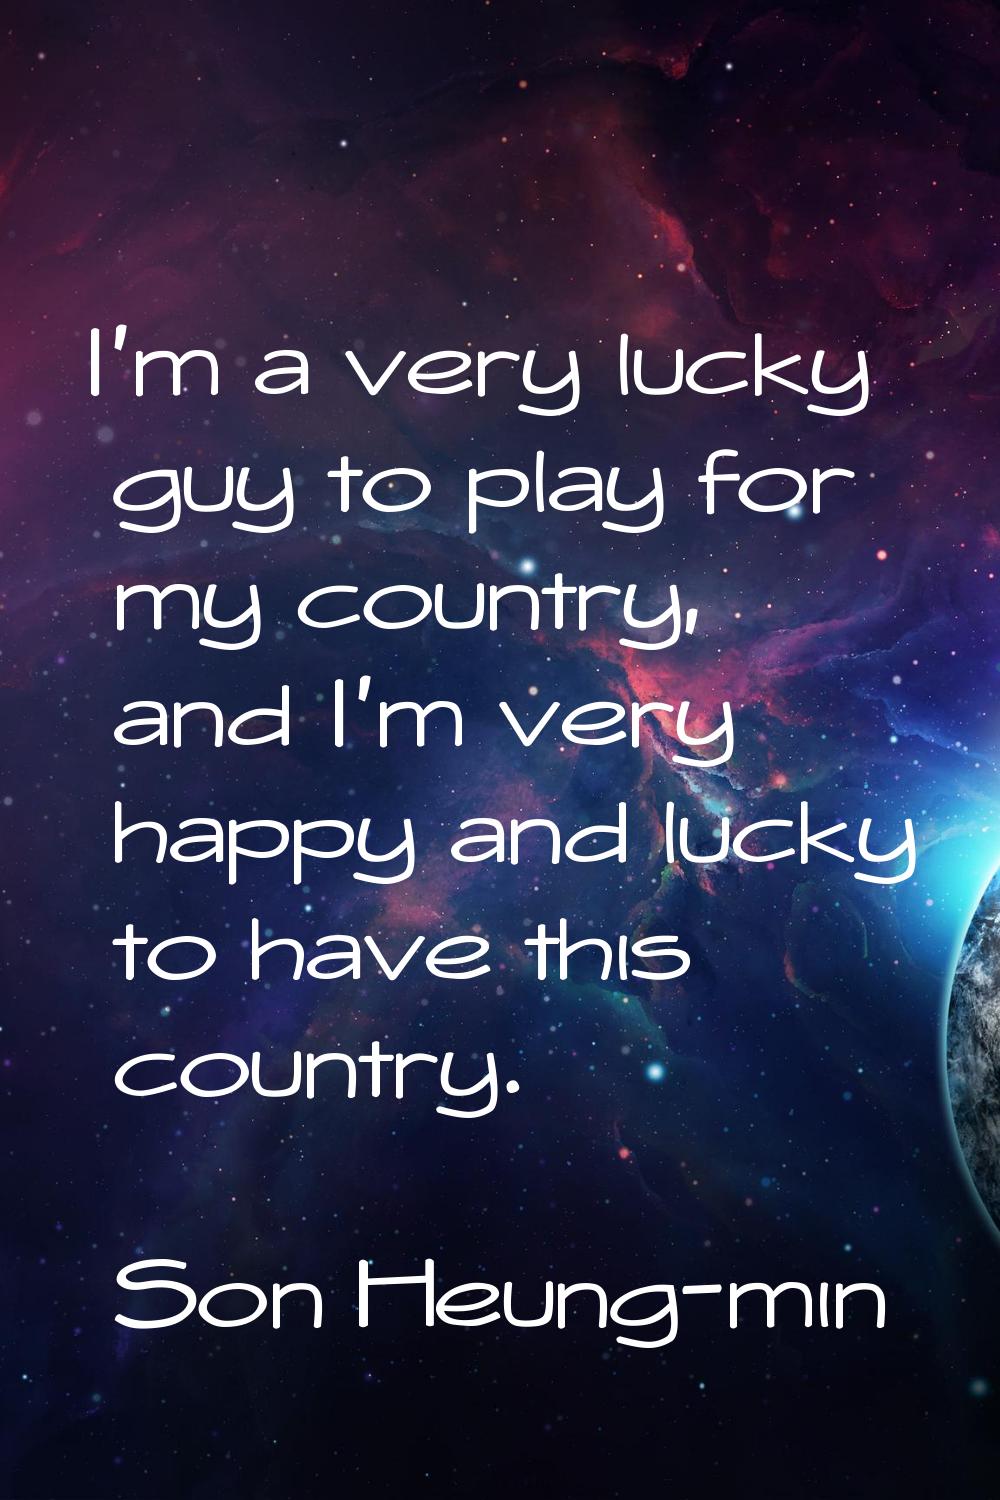 I'm a very lucky guy to play for my country, and I'm very happy and lucky to have this country.